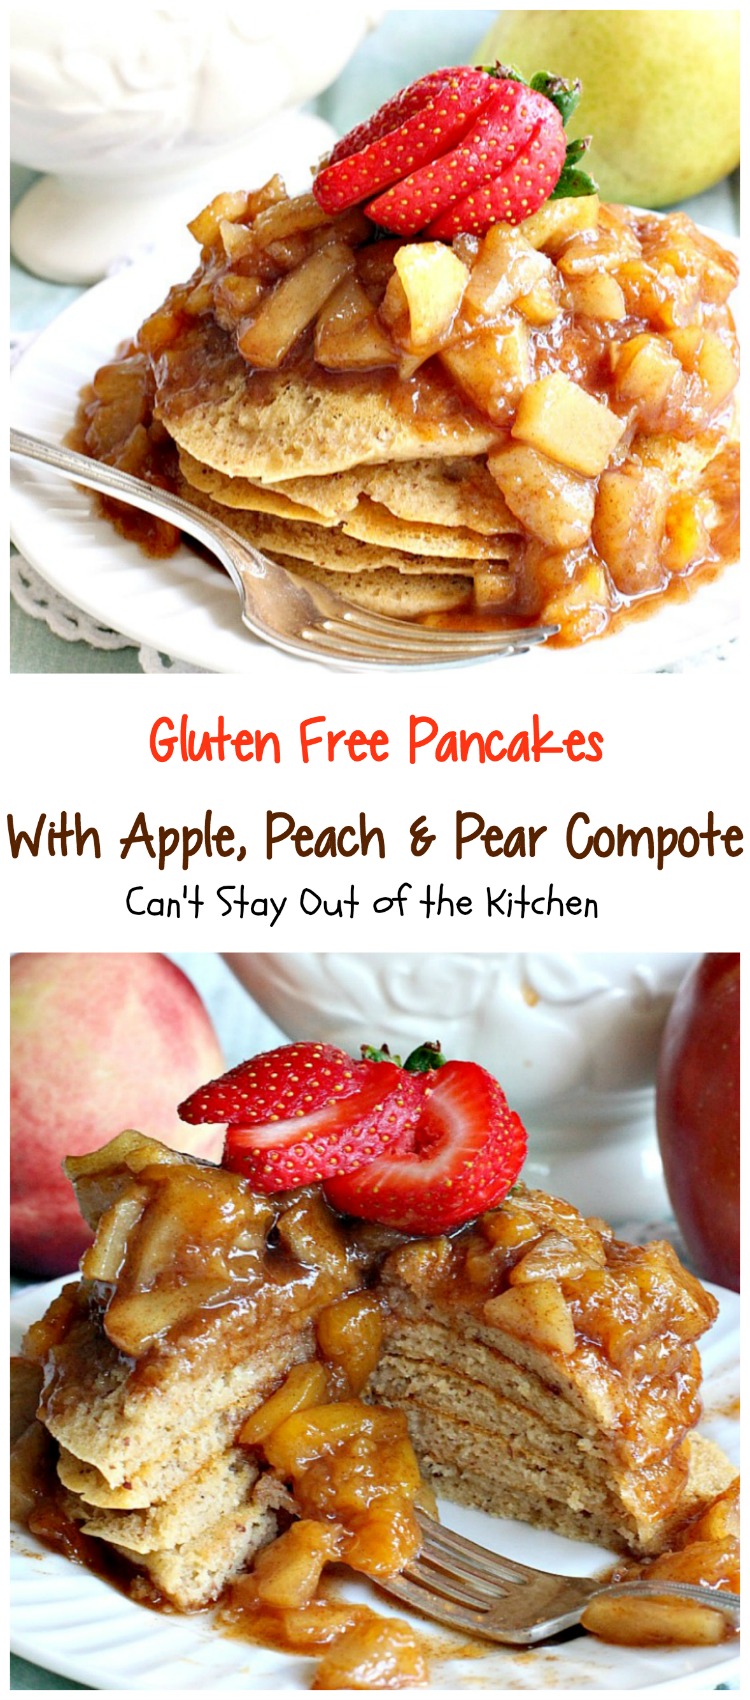 Gluten Free Pancakes with Apple, Peach & Pear Compote | Can't Stay Out of the Kitchen